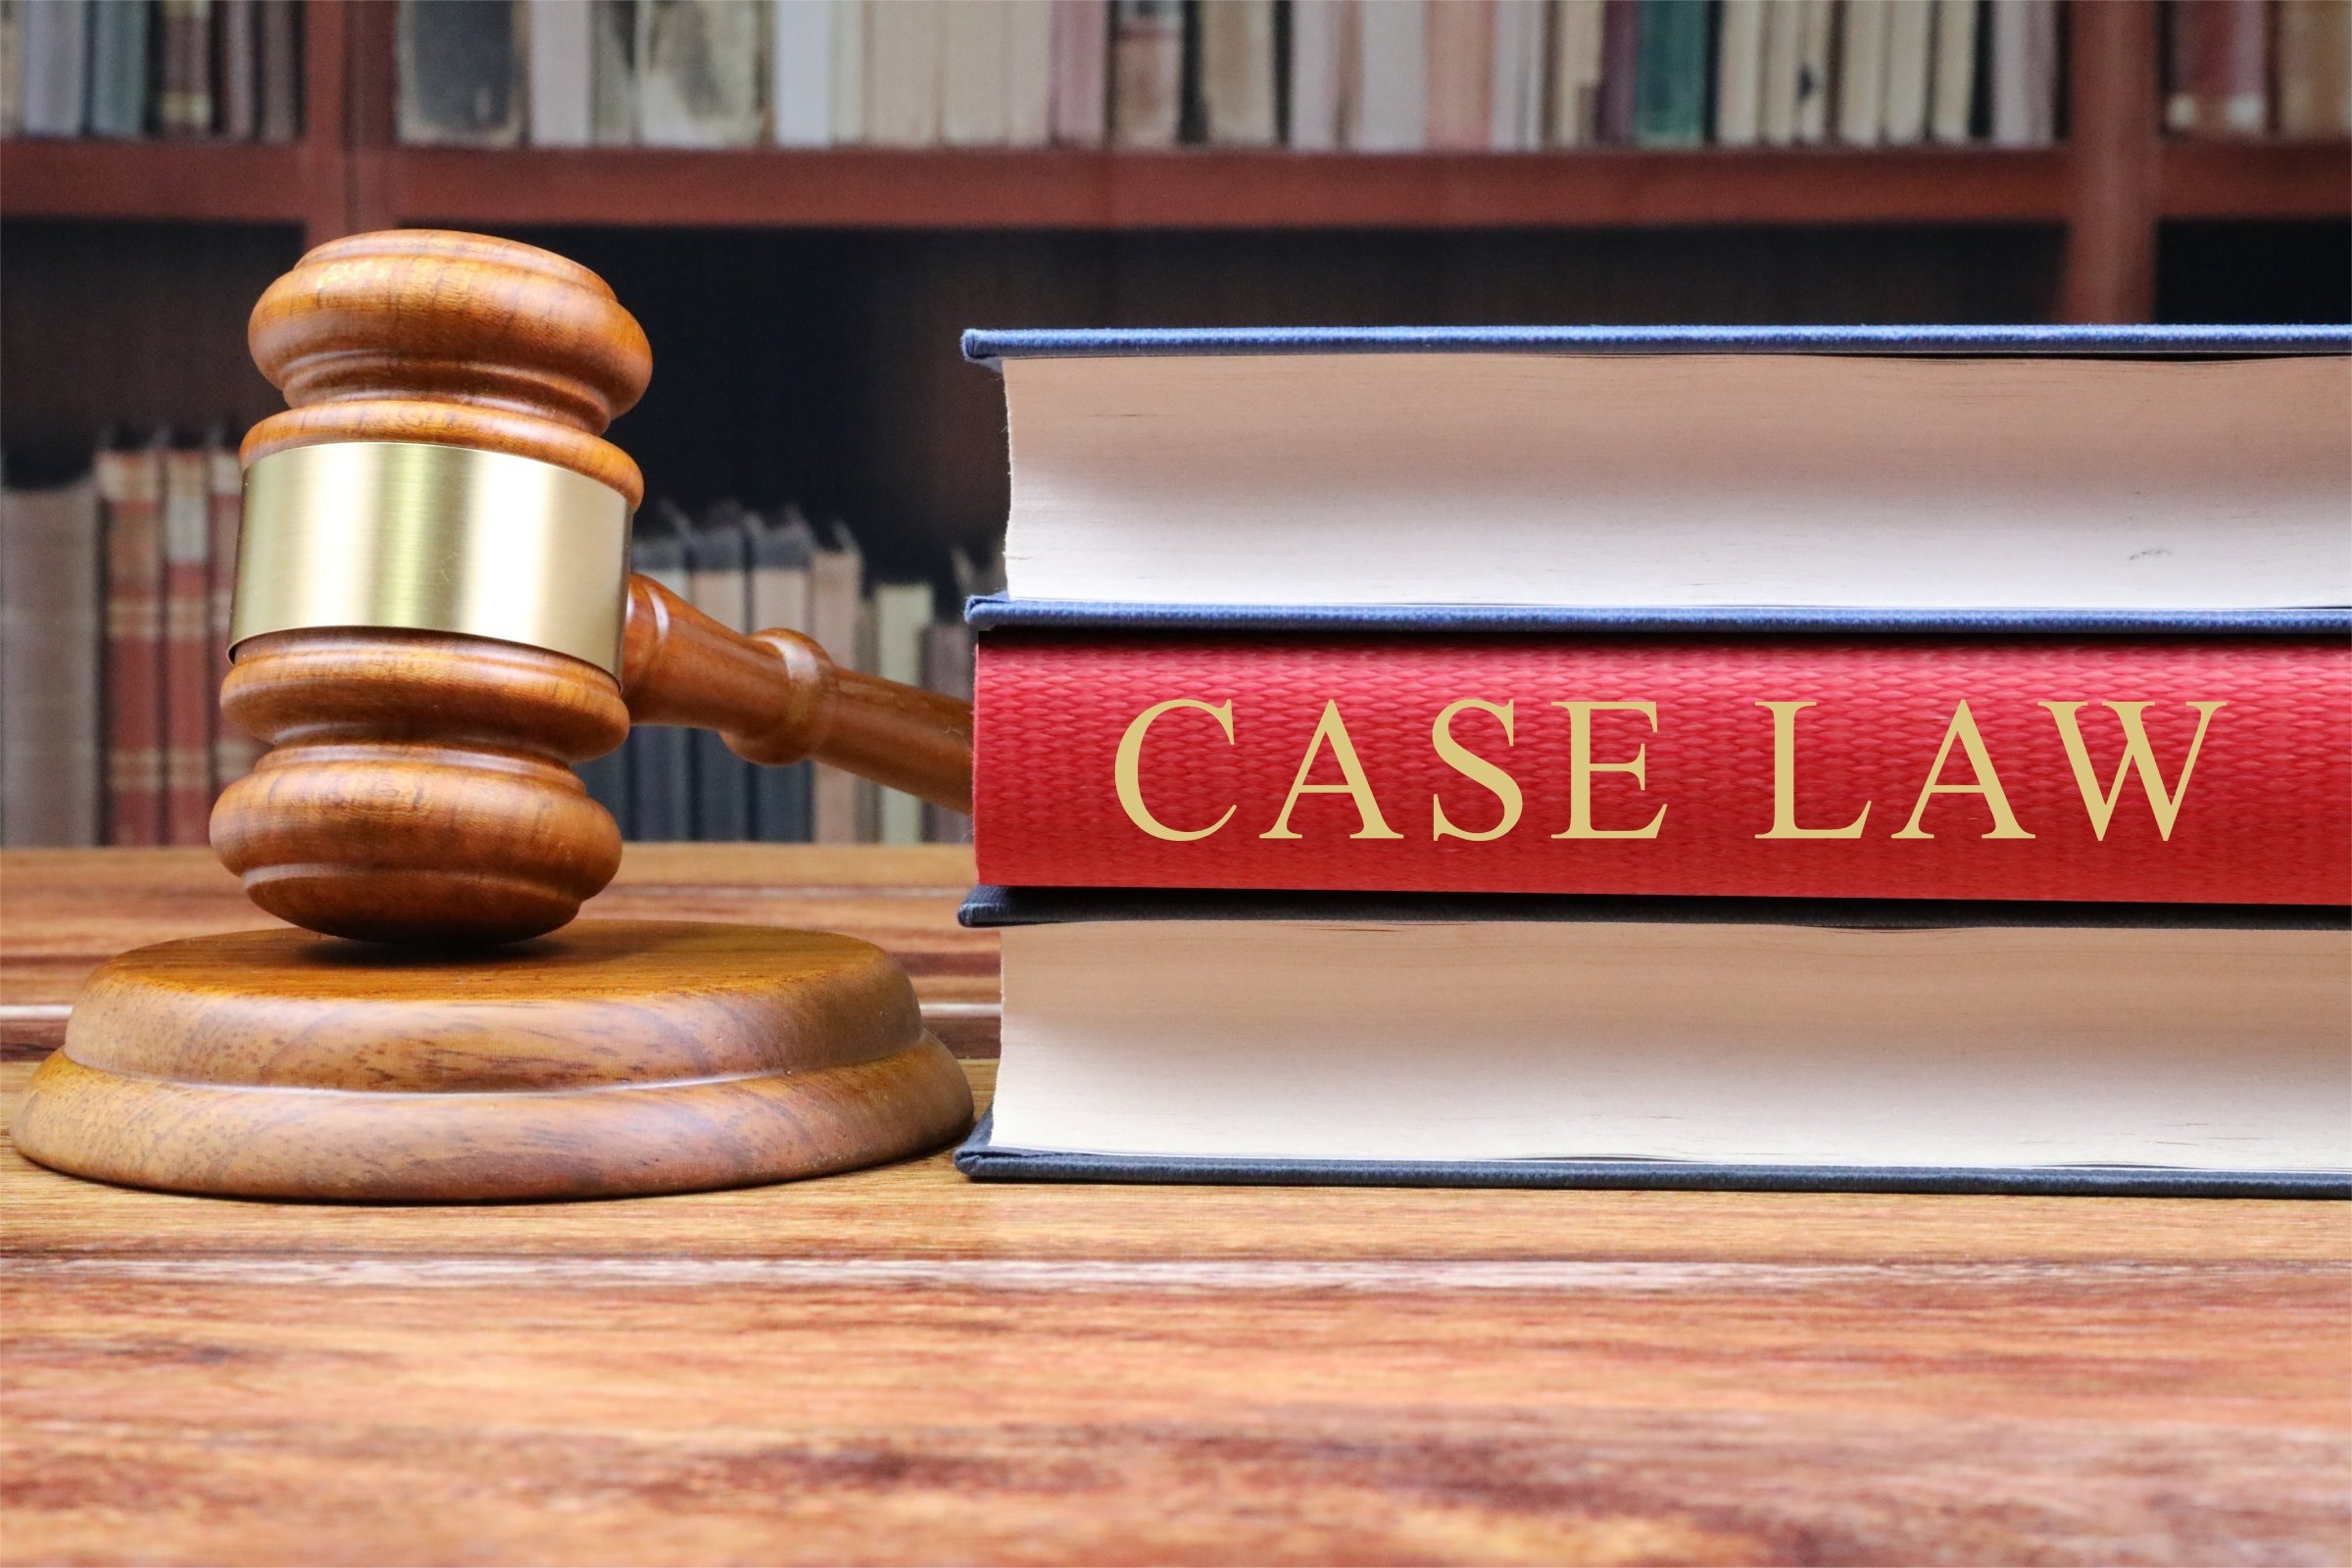 case law research free